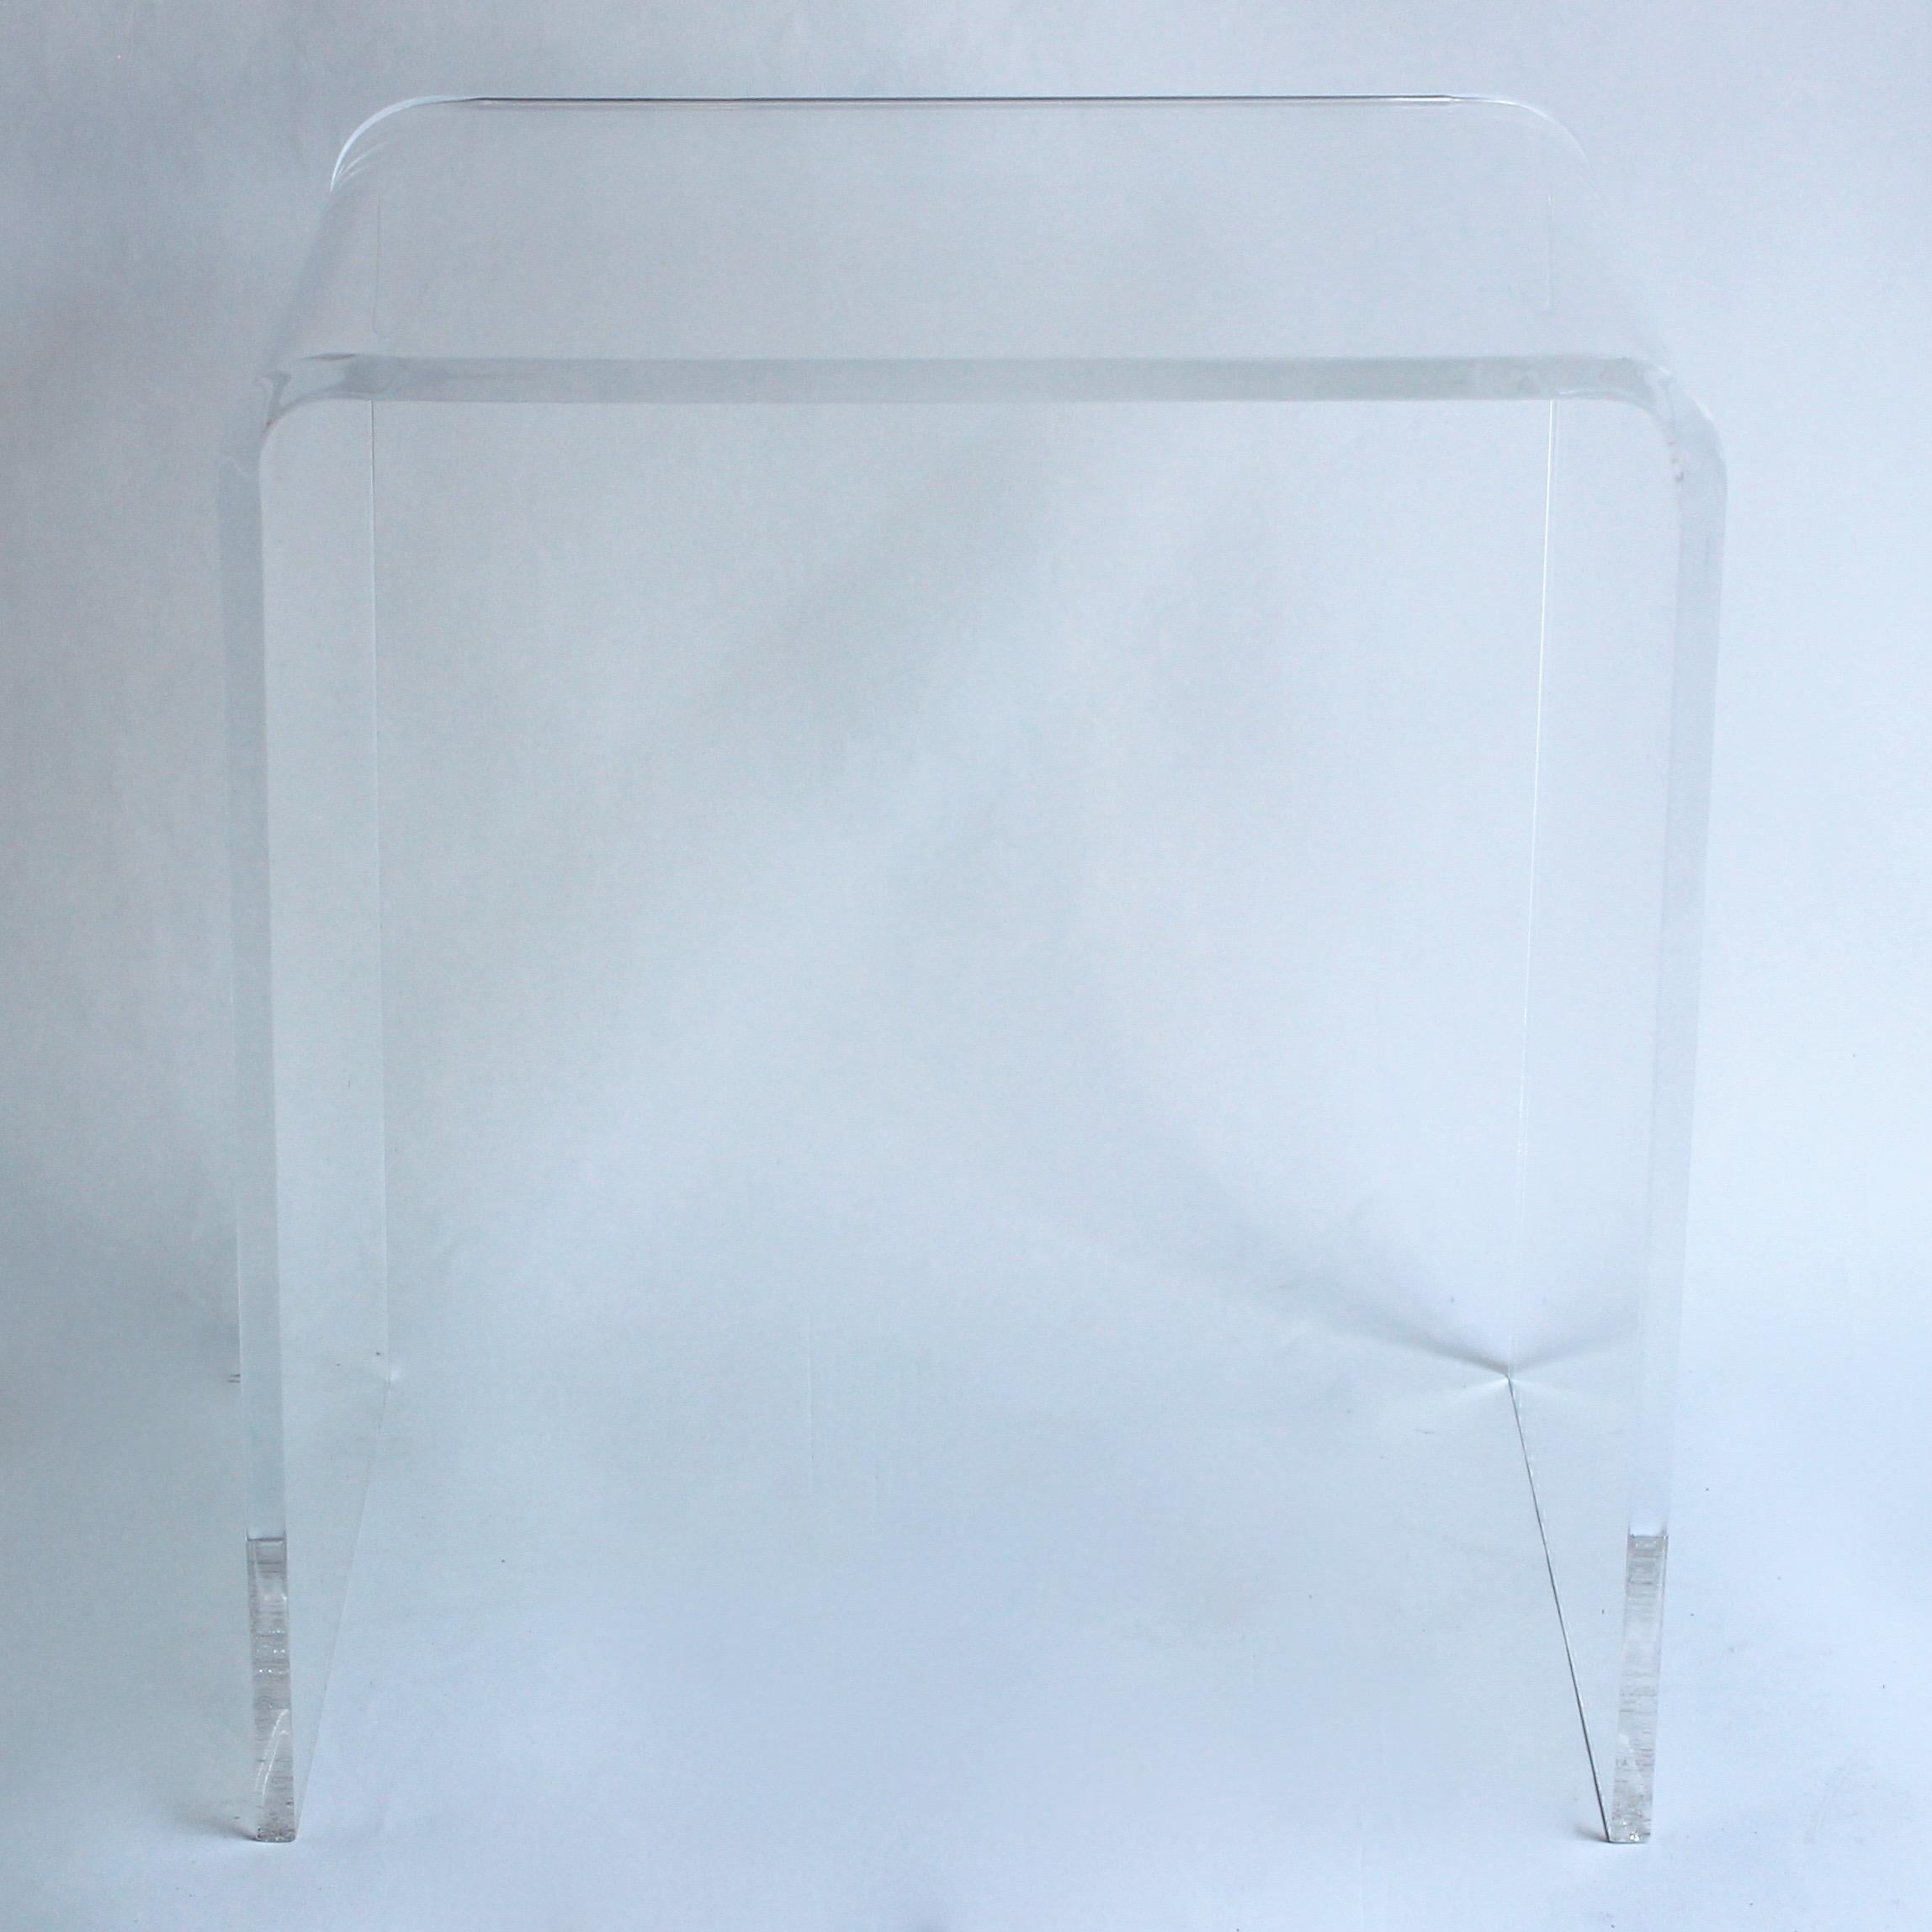 Lucite waterfall stool or side table.